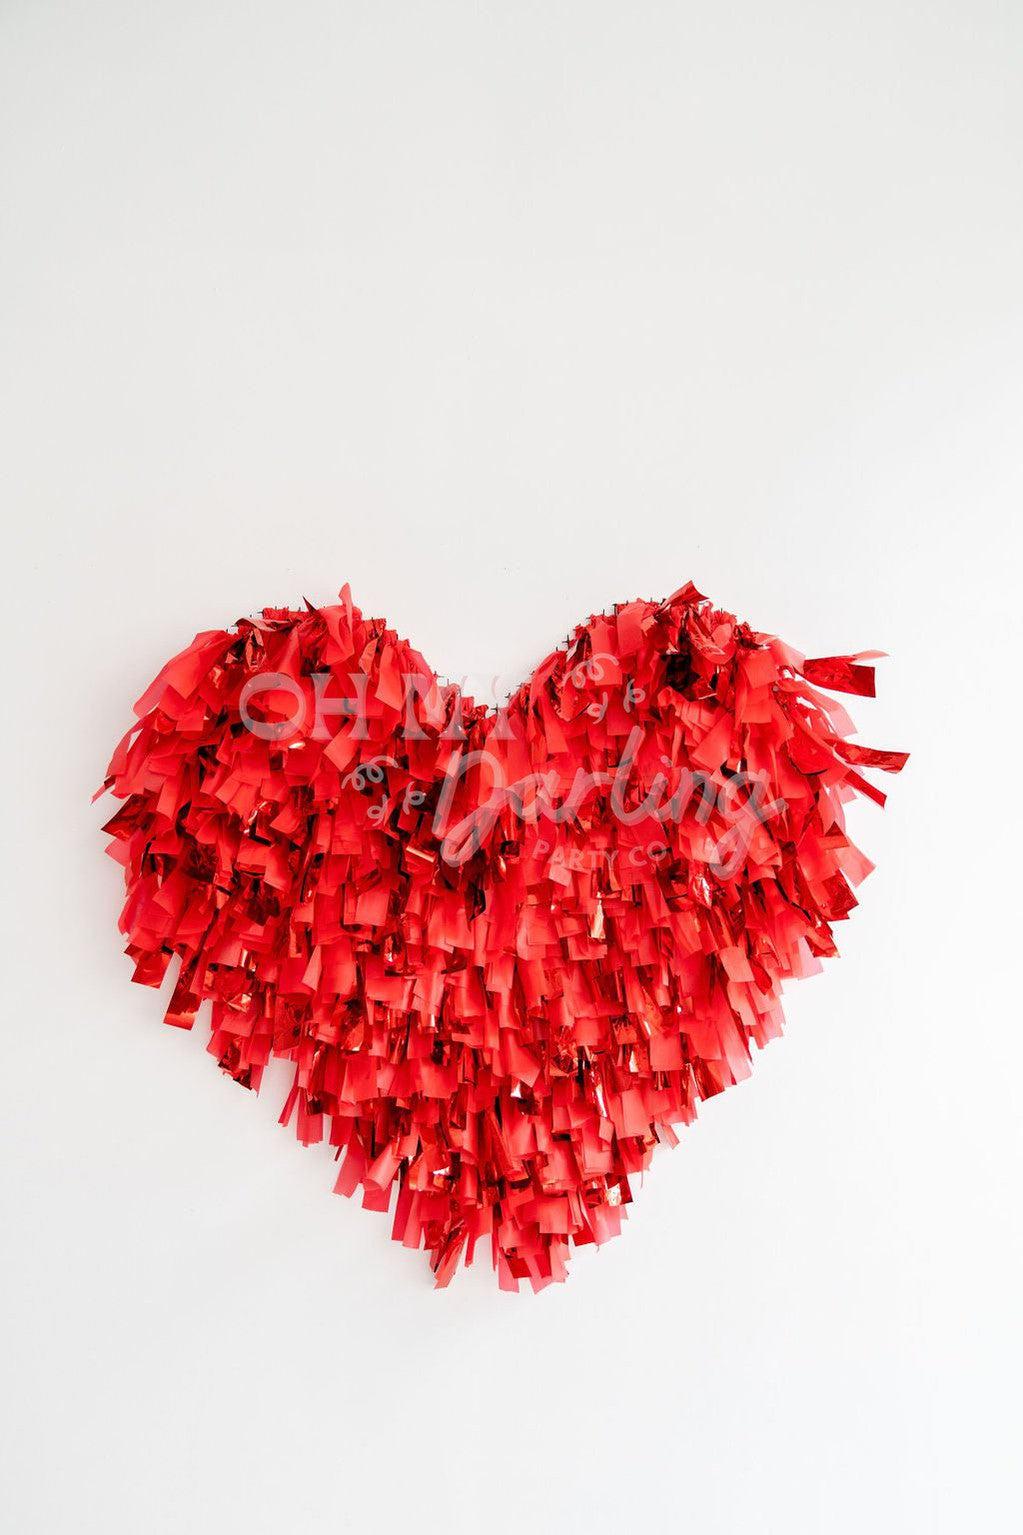 Heart Shape Backdrop-Fringe Backdrop-Party Decor-Oh My Darling Party Co-Oh My Darling Party Co-backdrops for party, balloon garlands, be my valentine, conversation hearts, fringe garland, Fringe Streamers, hearts, love, Love Is Love, love letters, love party, metallic red, OMDPC, party backdrops, party supplies, pink hearts, red, RED BACKDROP, red hearts, tassels, valentines, valentines day, valentines day party, valentines party, valentines party decor, valentintes